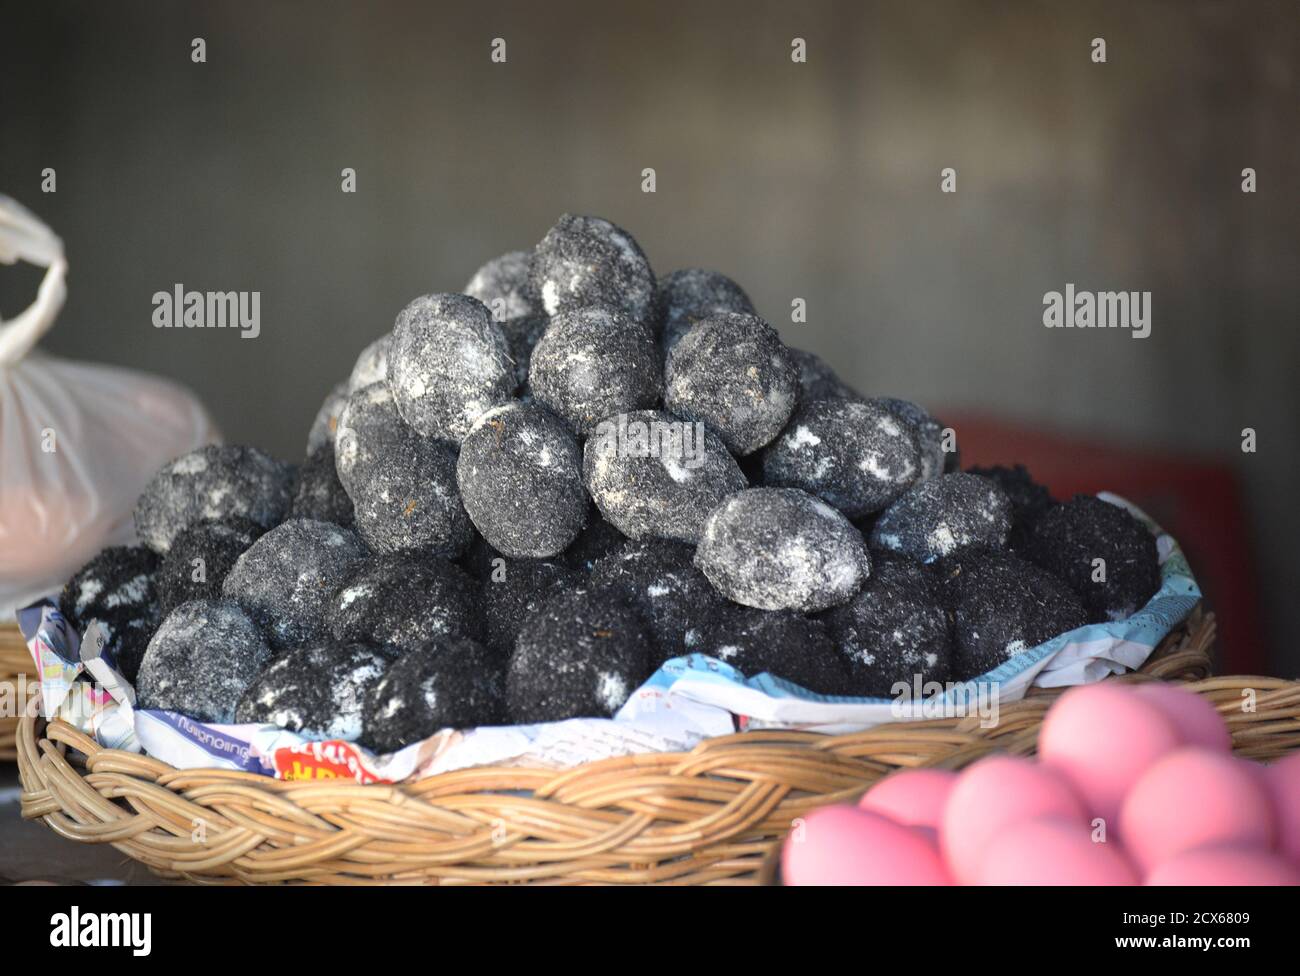 Century eggs or 1000 year eggs. Thailand. A chinese delicacy made by preserving ducks eggs in a mix of charcoal and lime for only around 100 days. Also sold in Cambodia Stock Photo